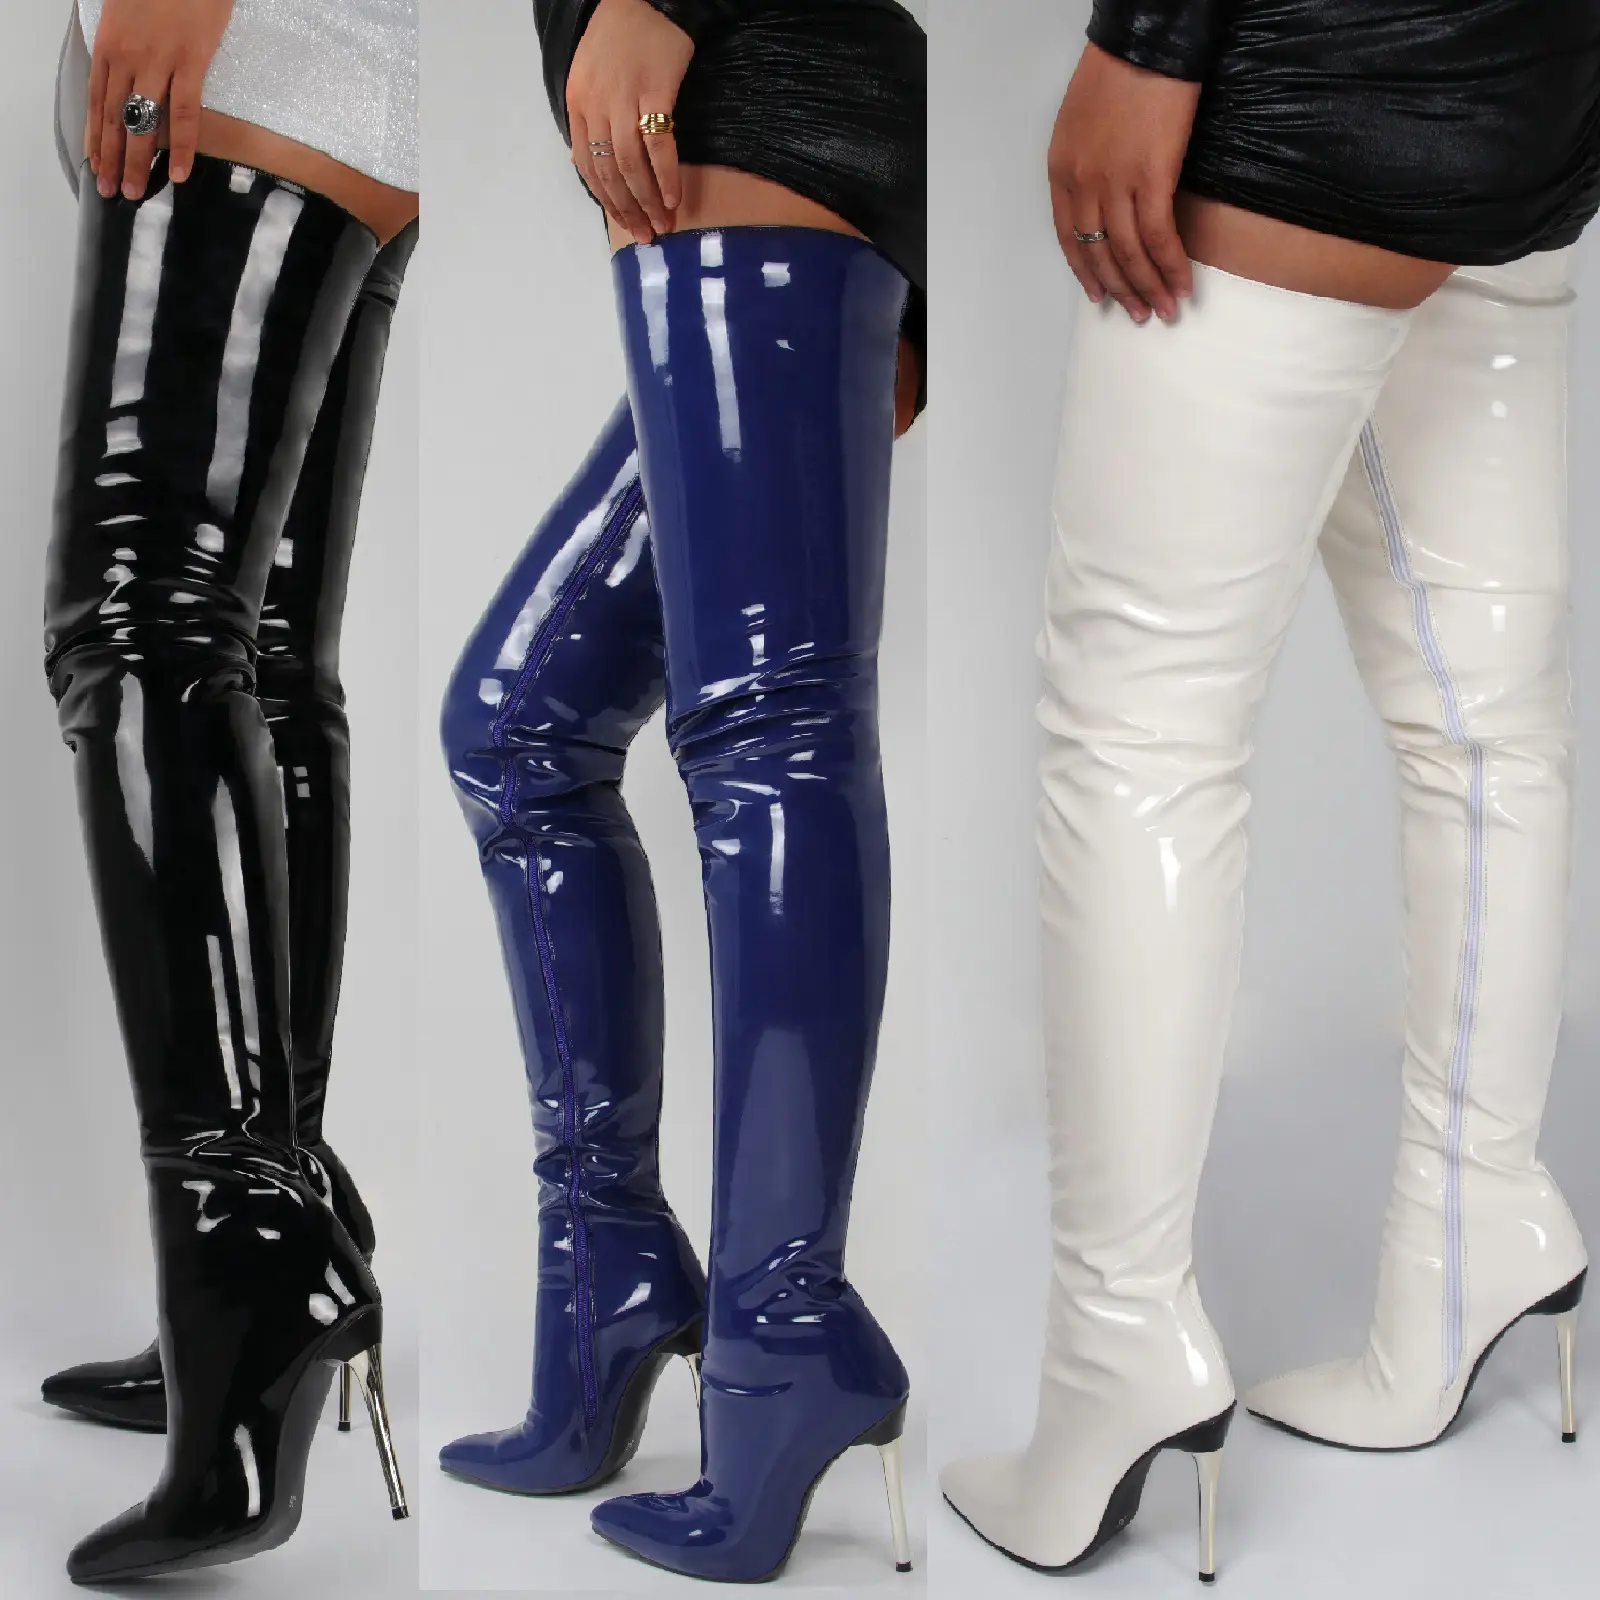 x20802 women shiny PU leather Over the Knee long boots plus size Knee high boot with zipper shiny winter high heel boots